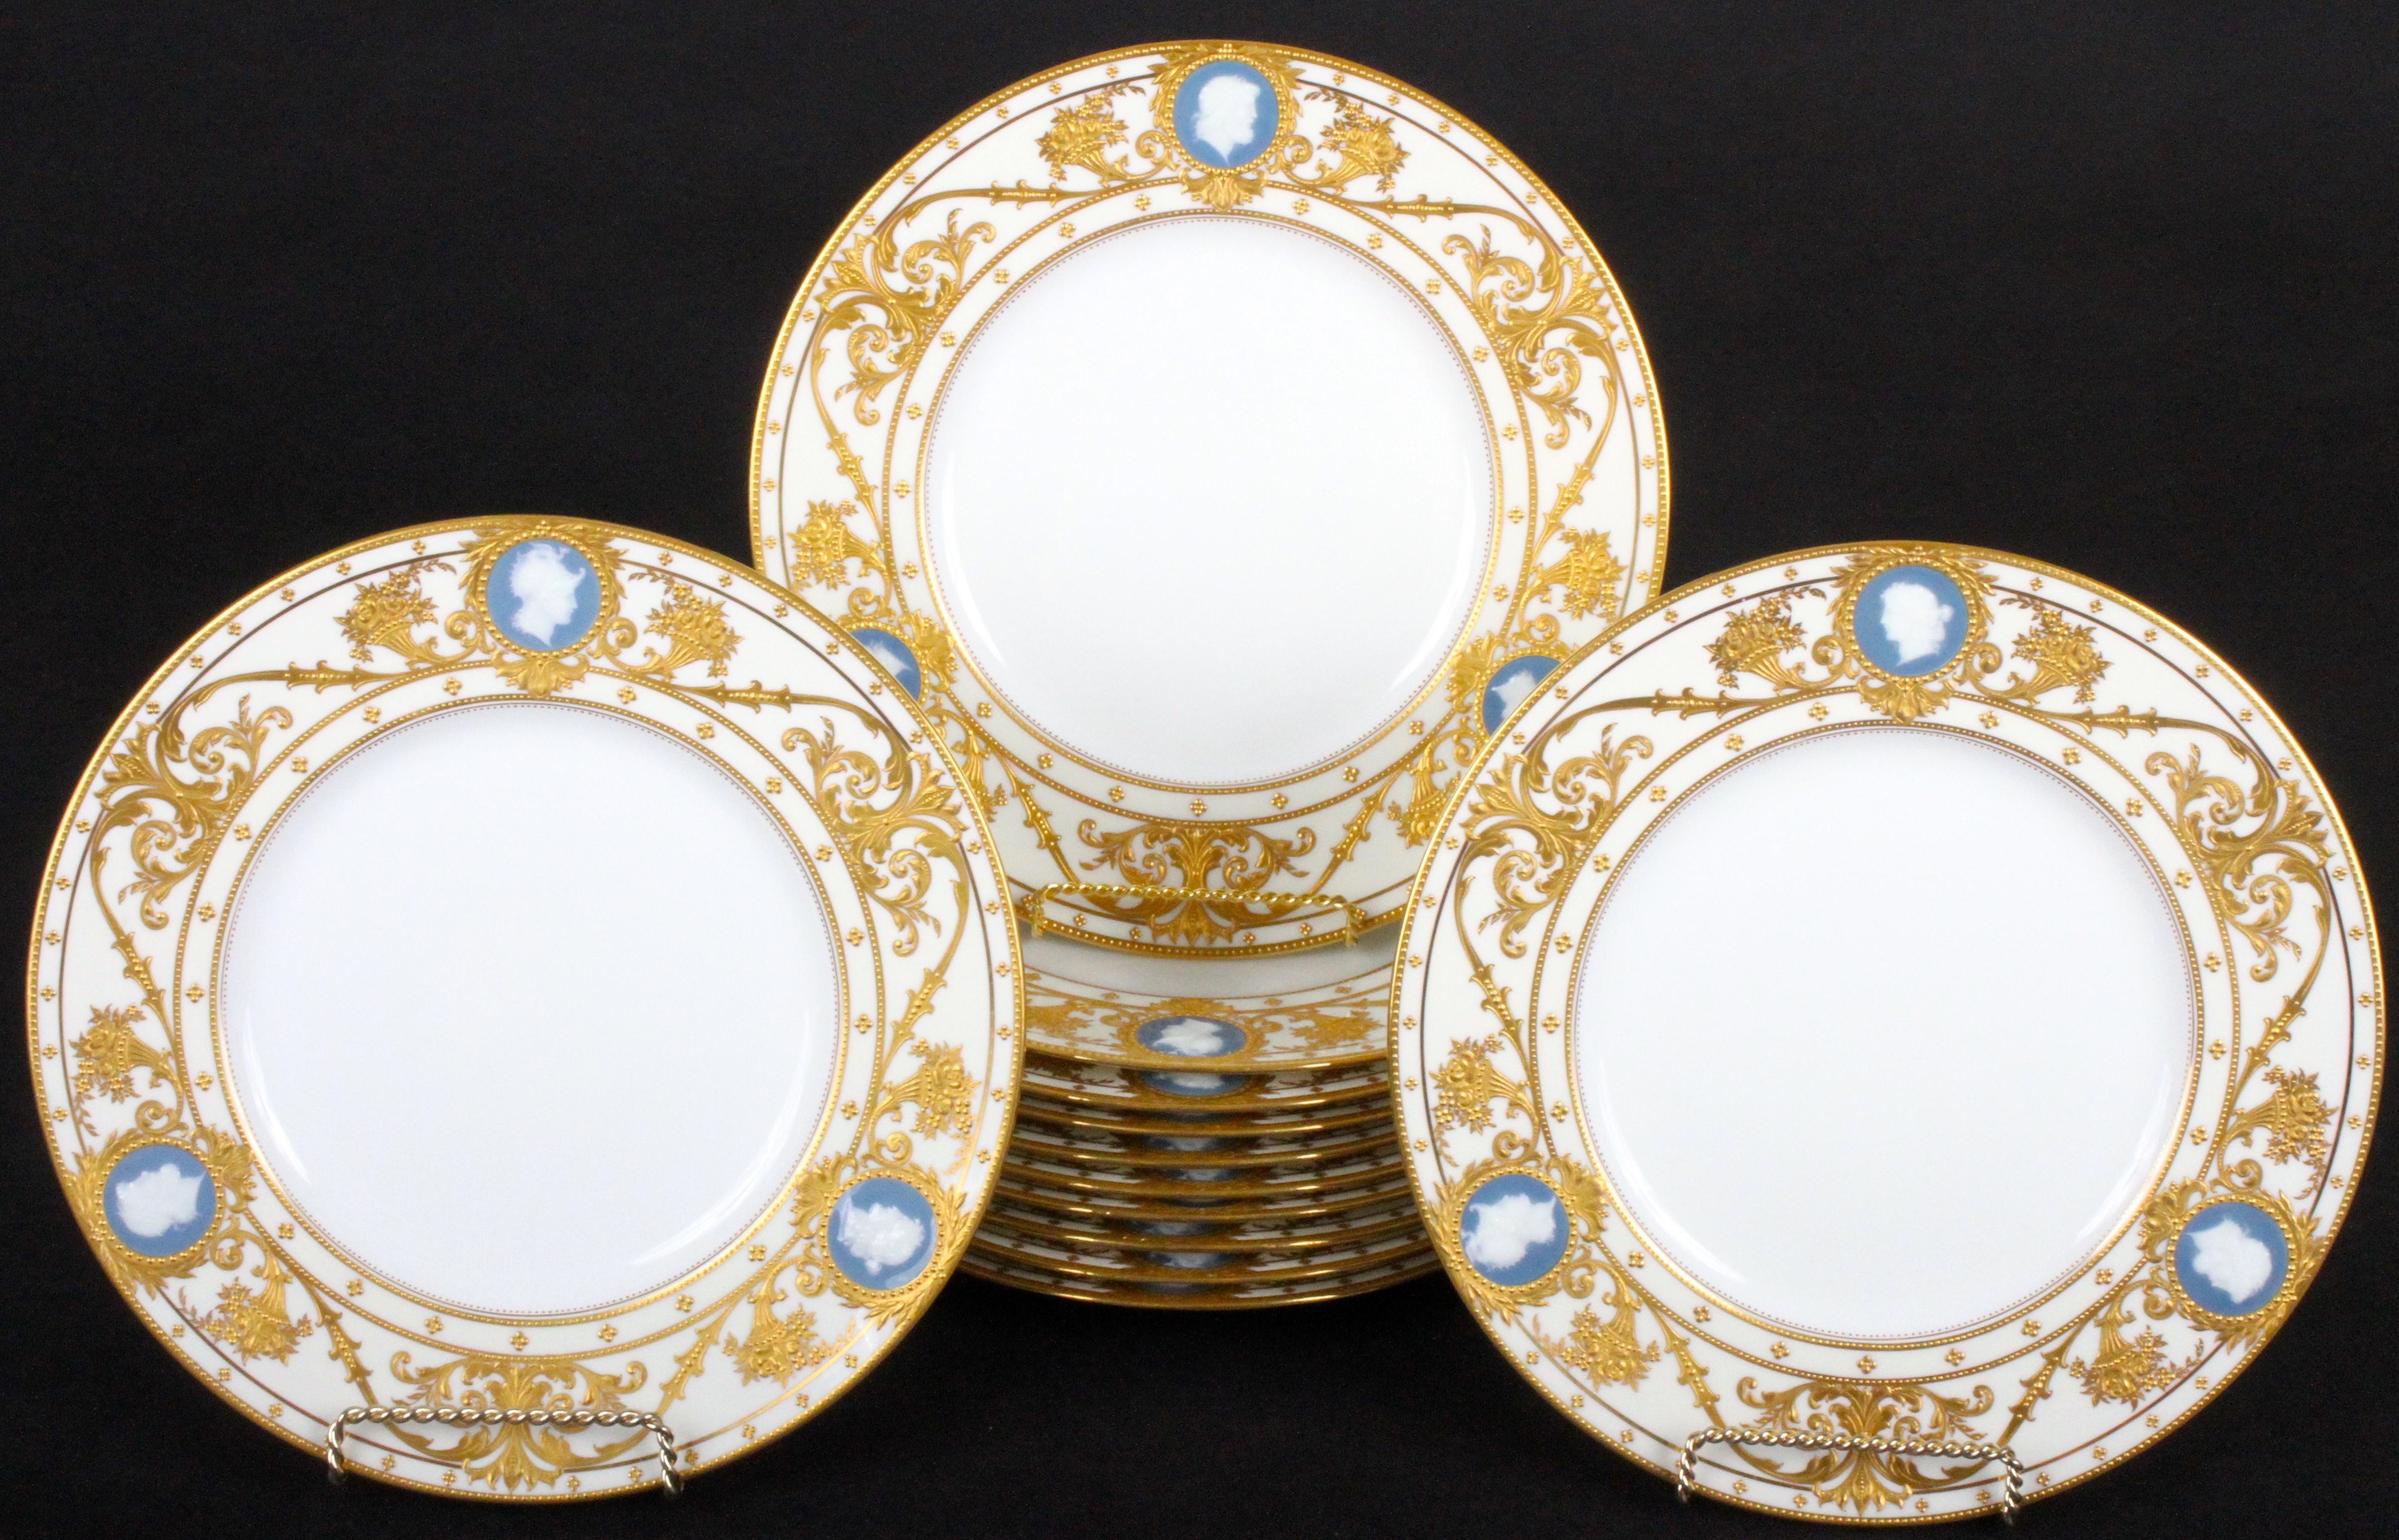 This pristine set of pate-sur-pate service, cabinet or dinner plates features reserves of classical cameo heads and heavy 22-karat raised paste gold gilding. The cameos are composed of white slip set on a blue background, they are ringed by gold